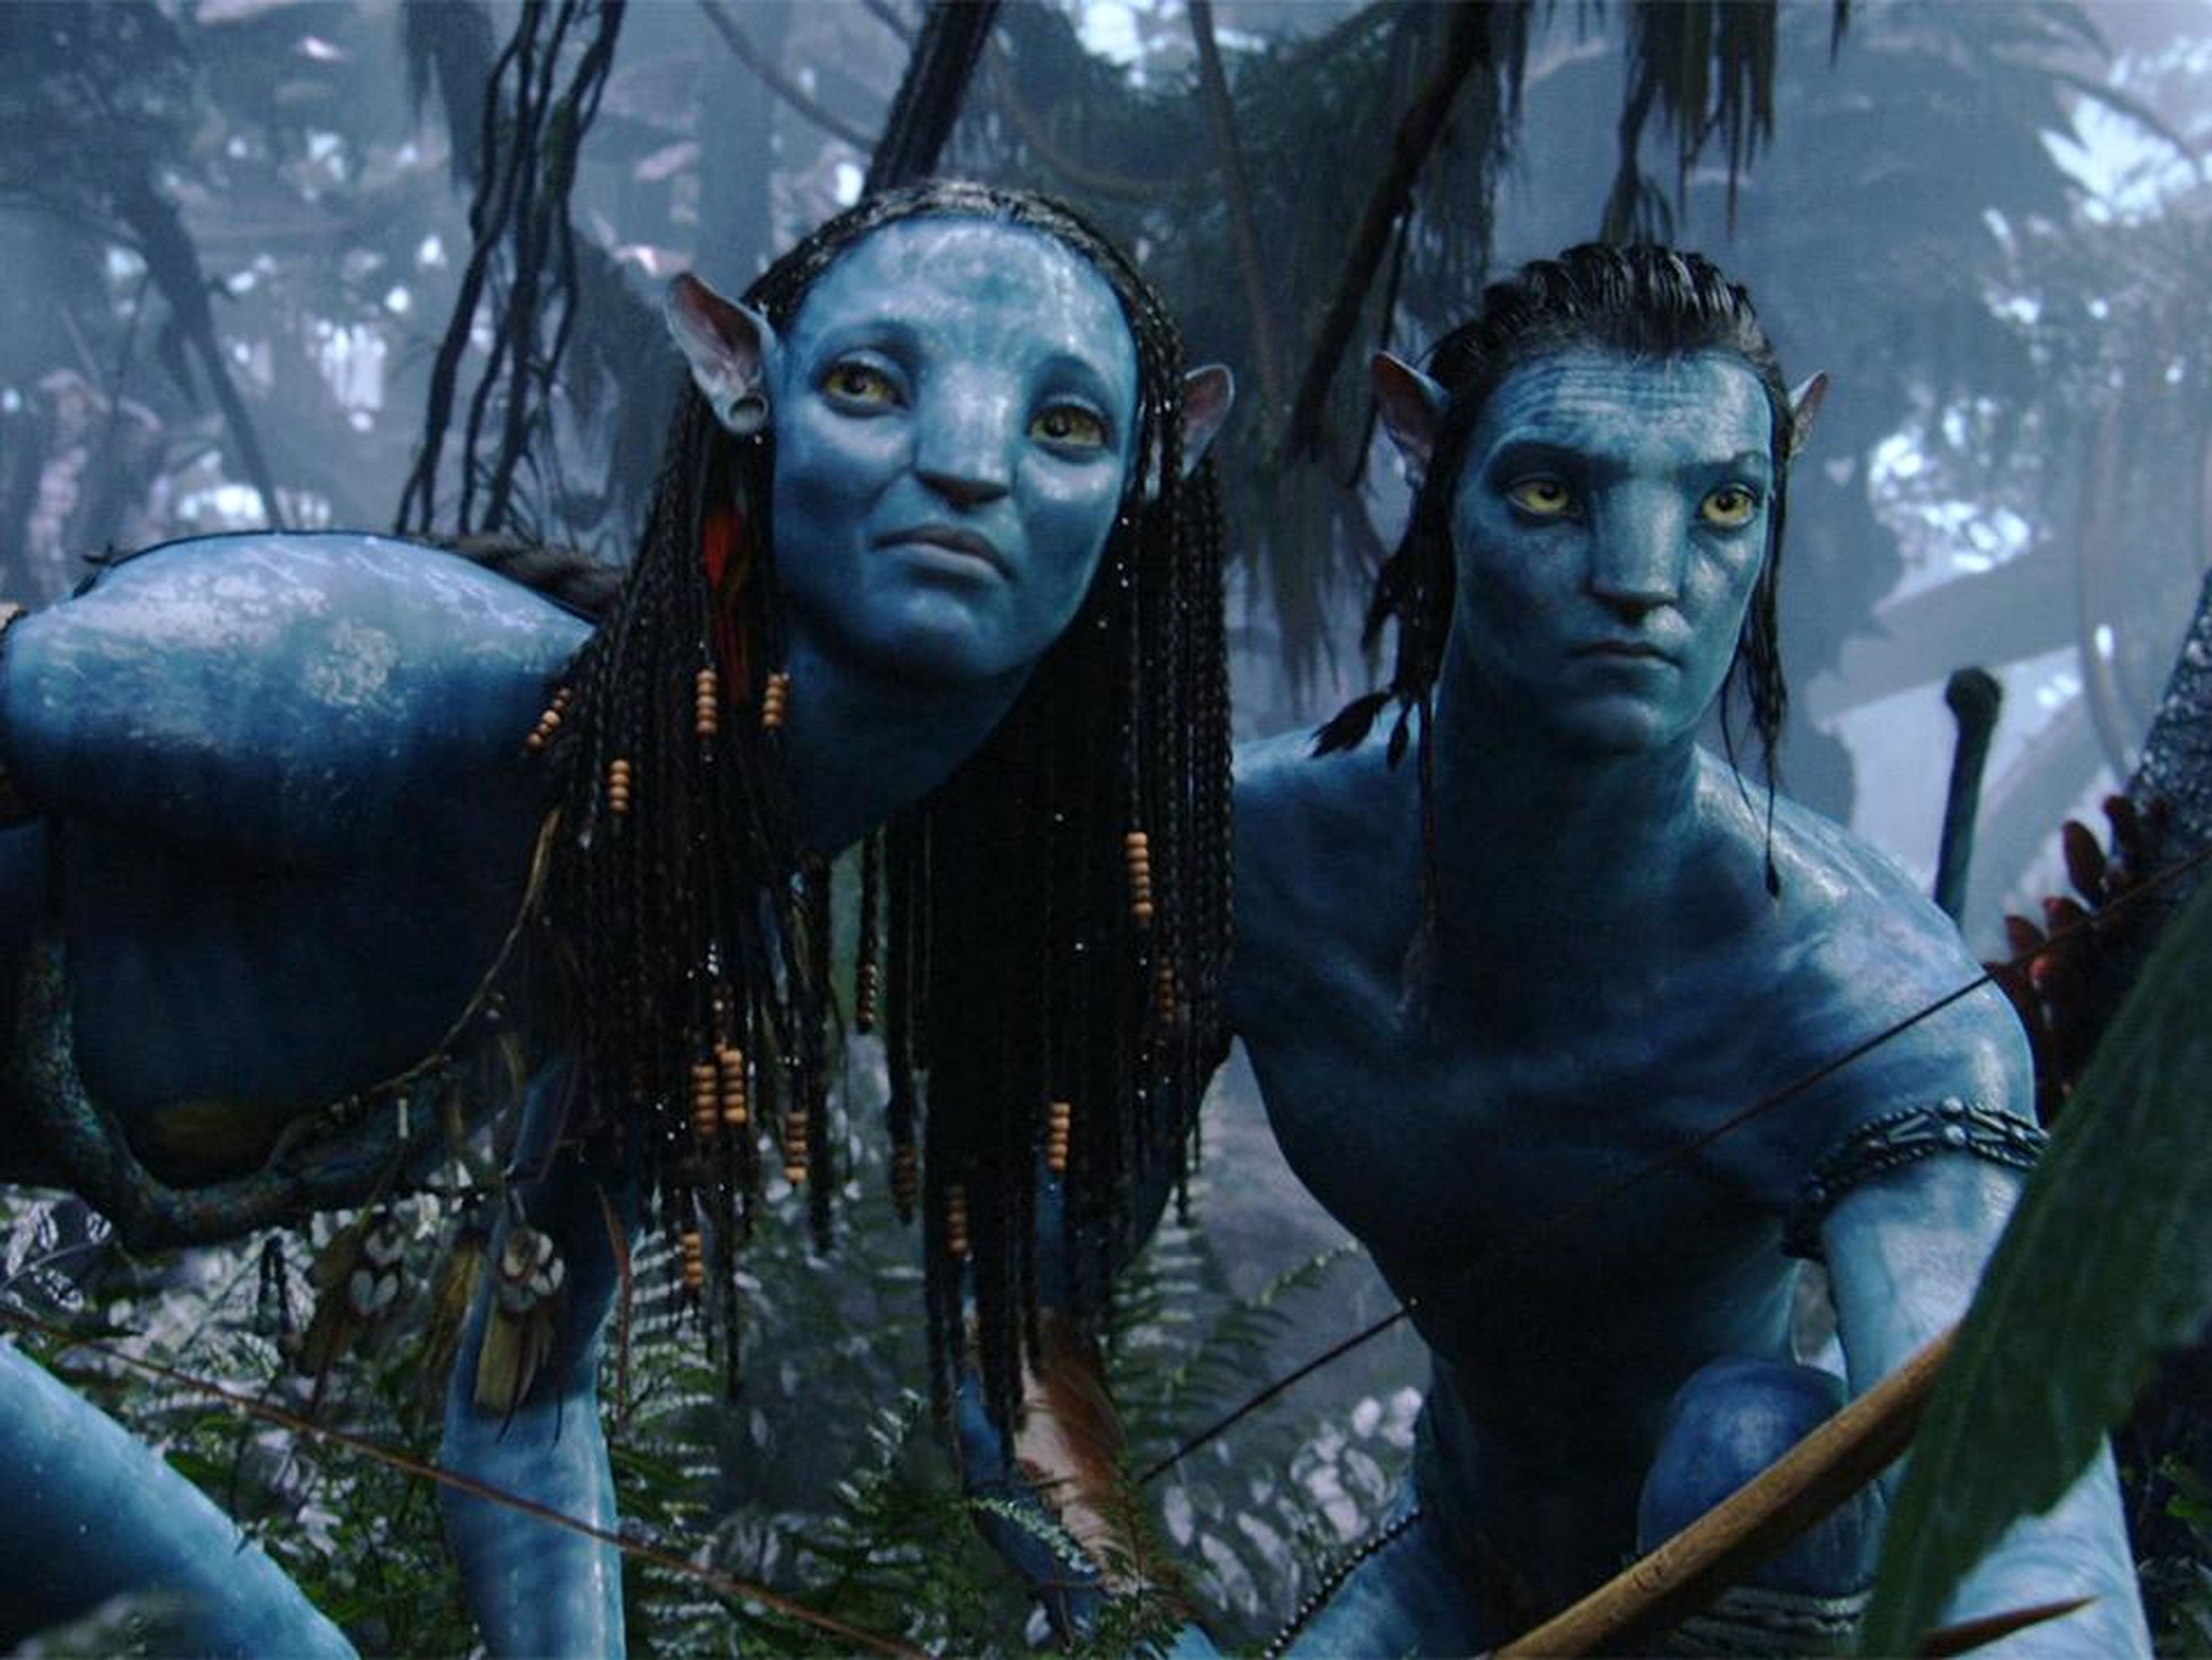 A scene from "Avatar."